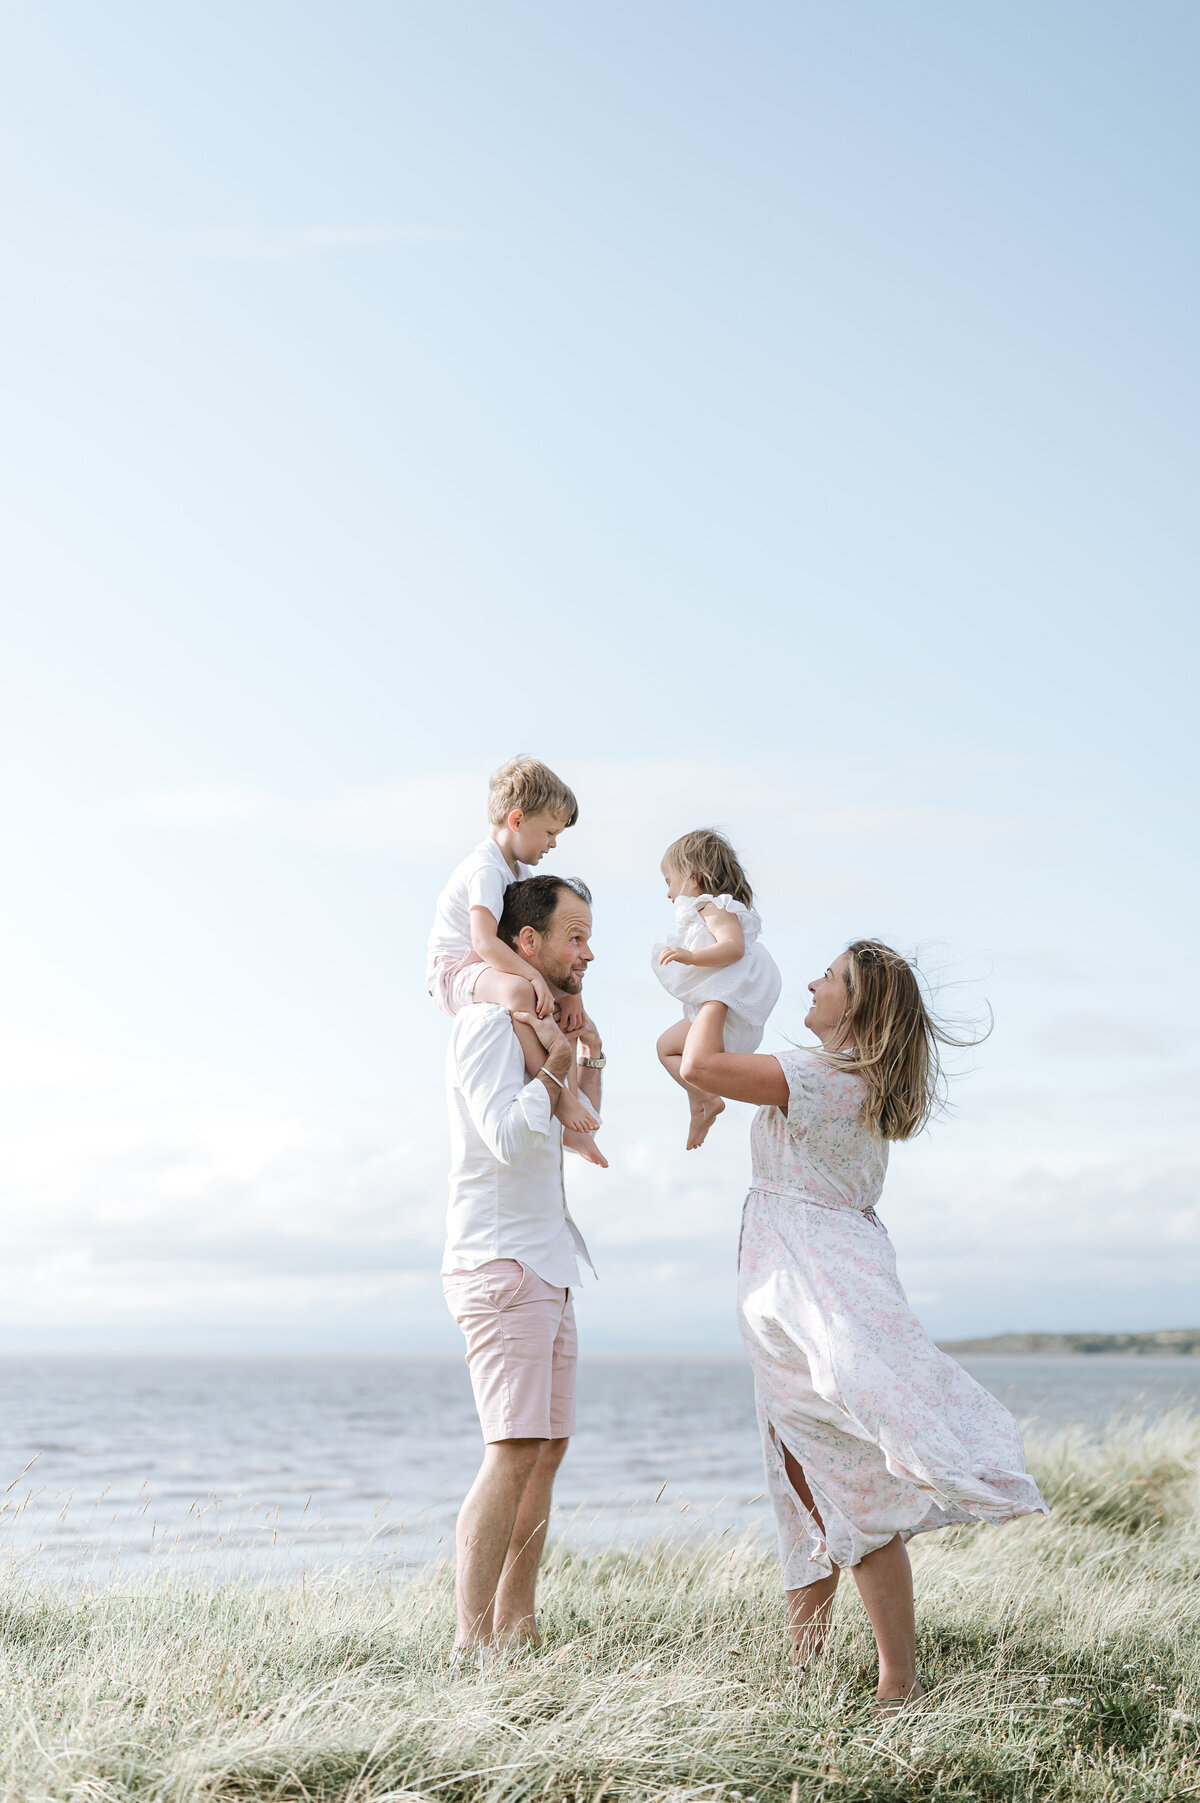 Bristol family photography of a mother and father with their children by the sea